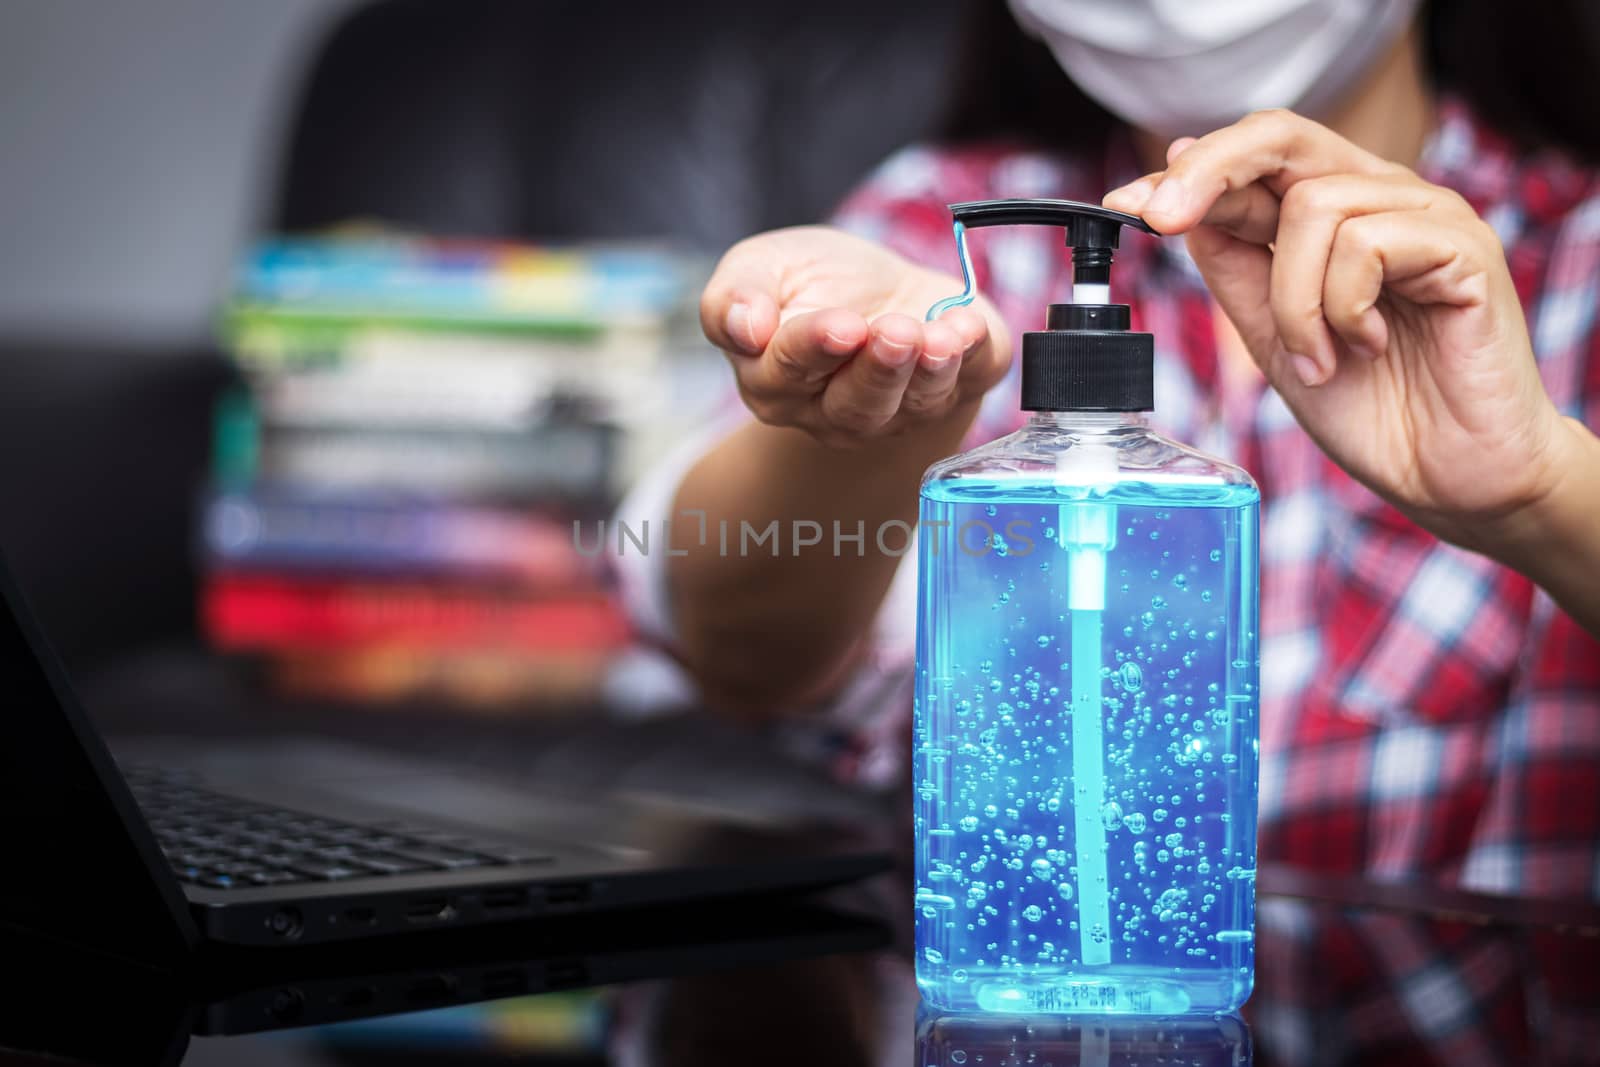 people washing hand by hand sanitizer alcohol gel for cleaning and disinfection, before typing on keyboard for working. prevention of spreading of germs during infections of COVID-19 Coronavirus